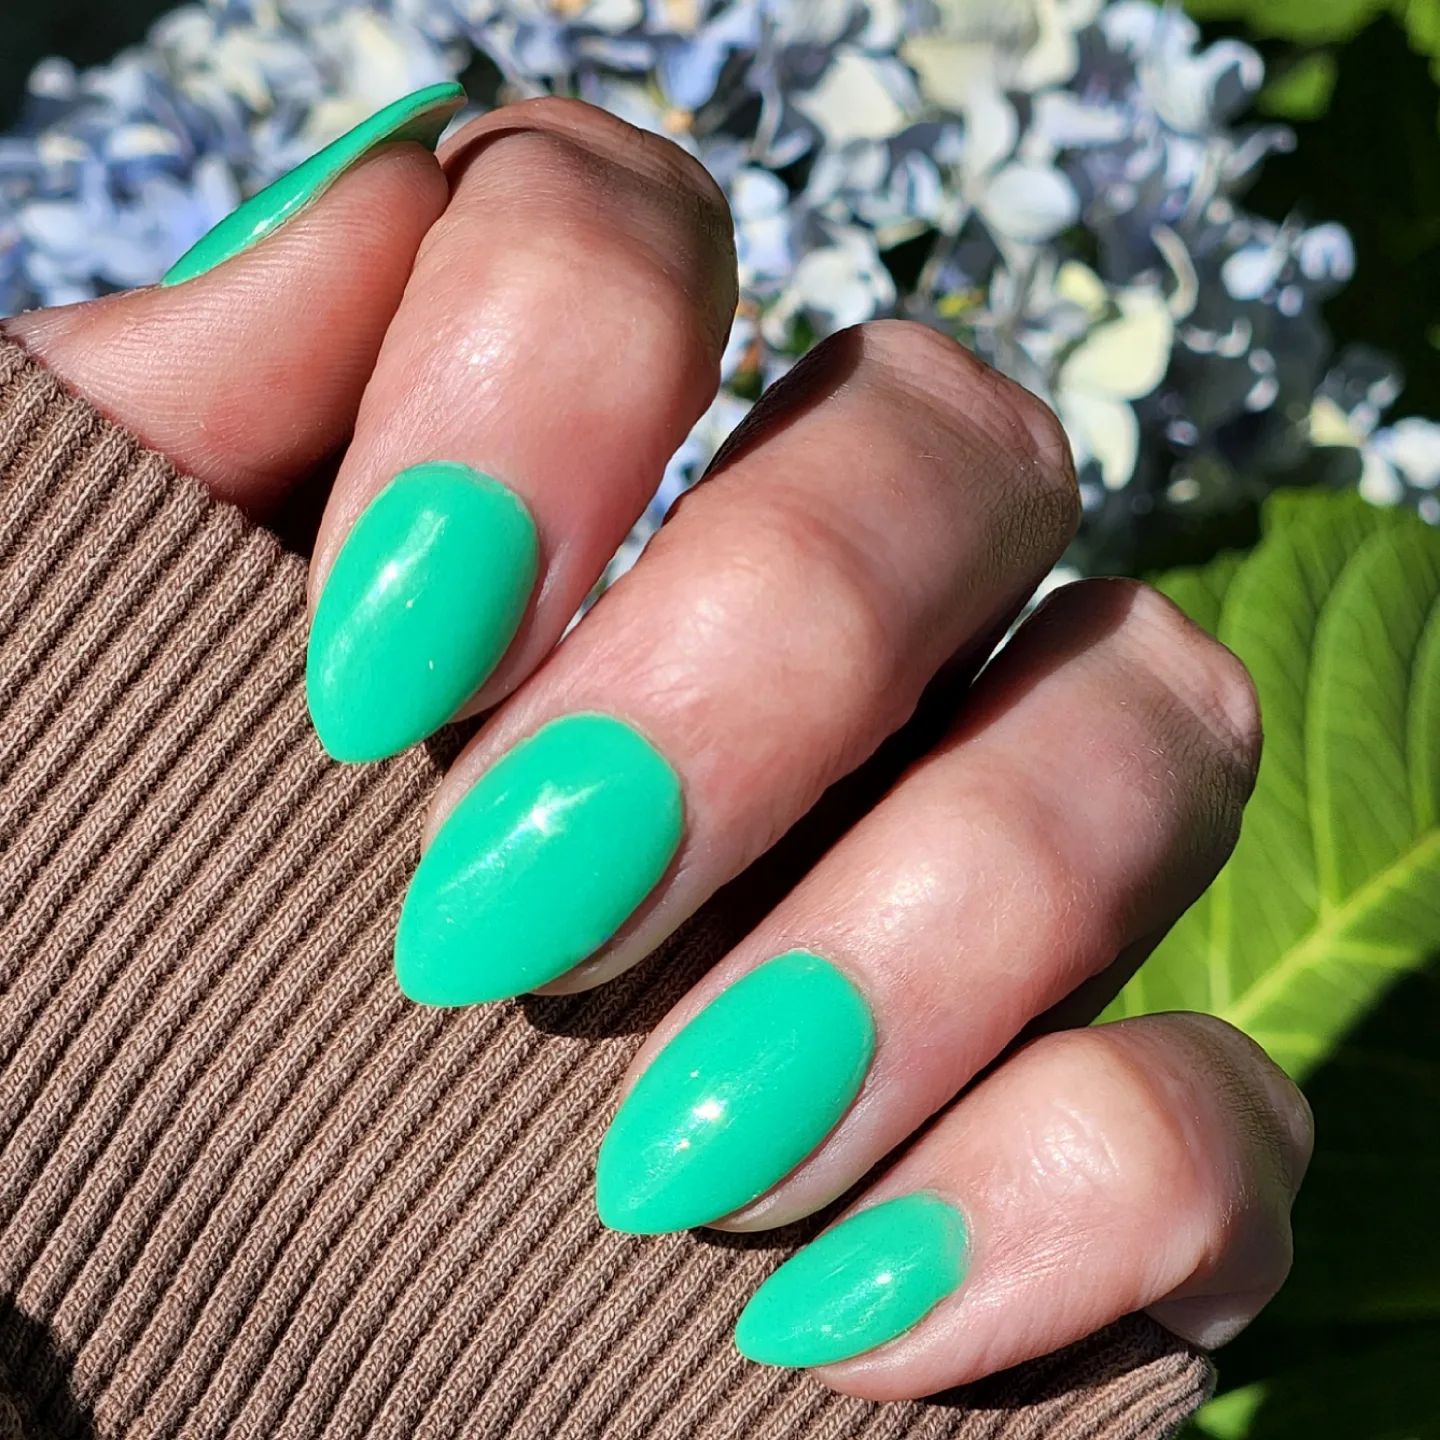 This perfect shade of green will amaze you with its bright look. You should consider mint green neon nails as your next manicure.